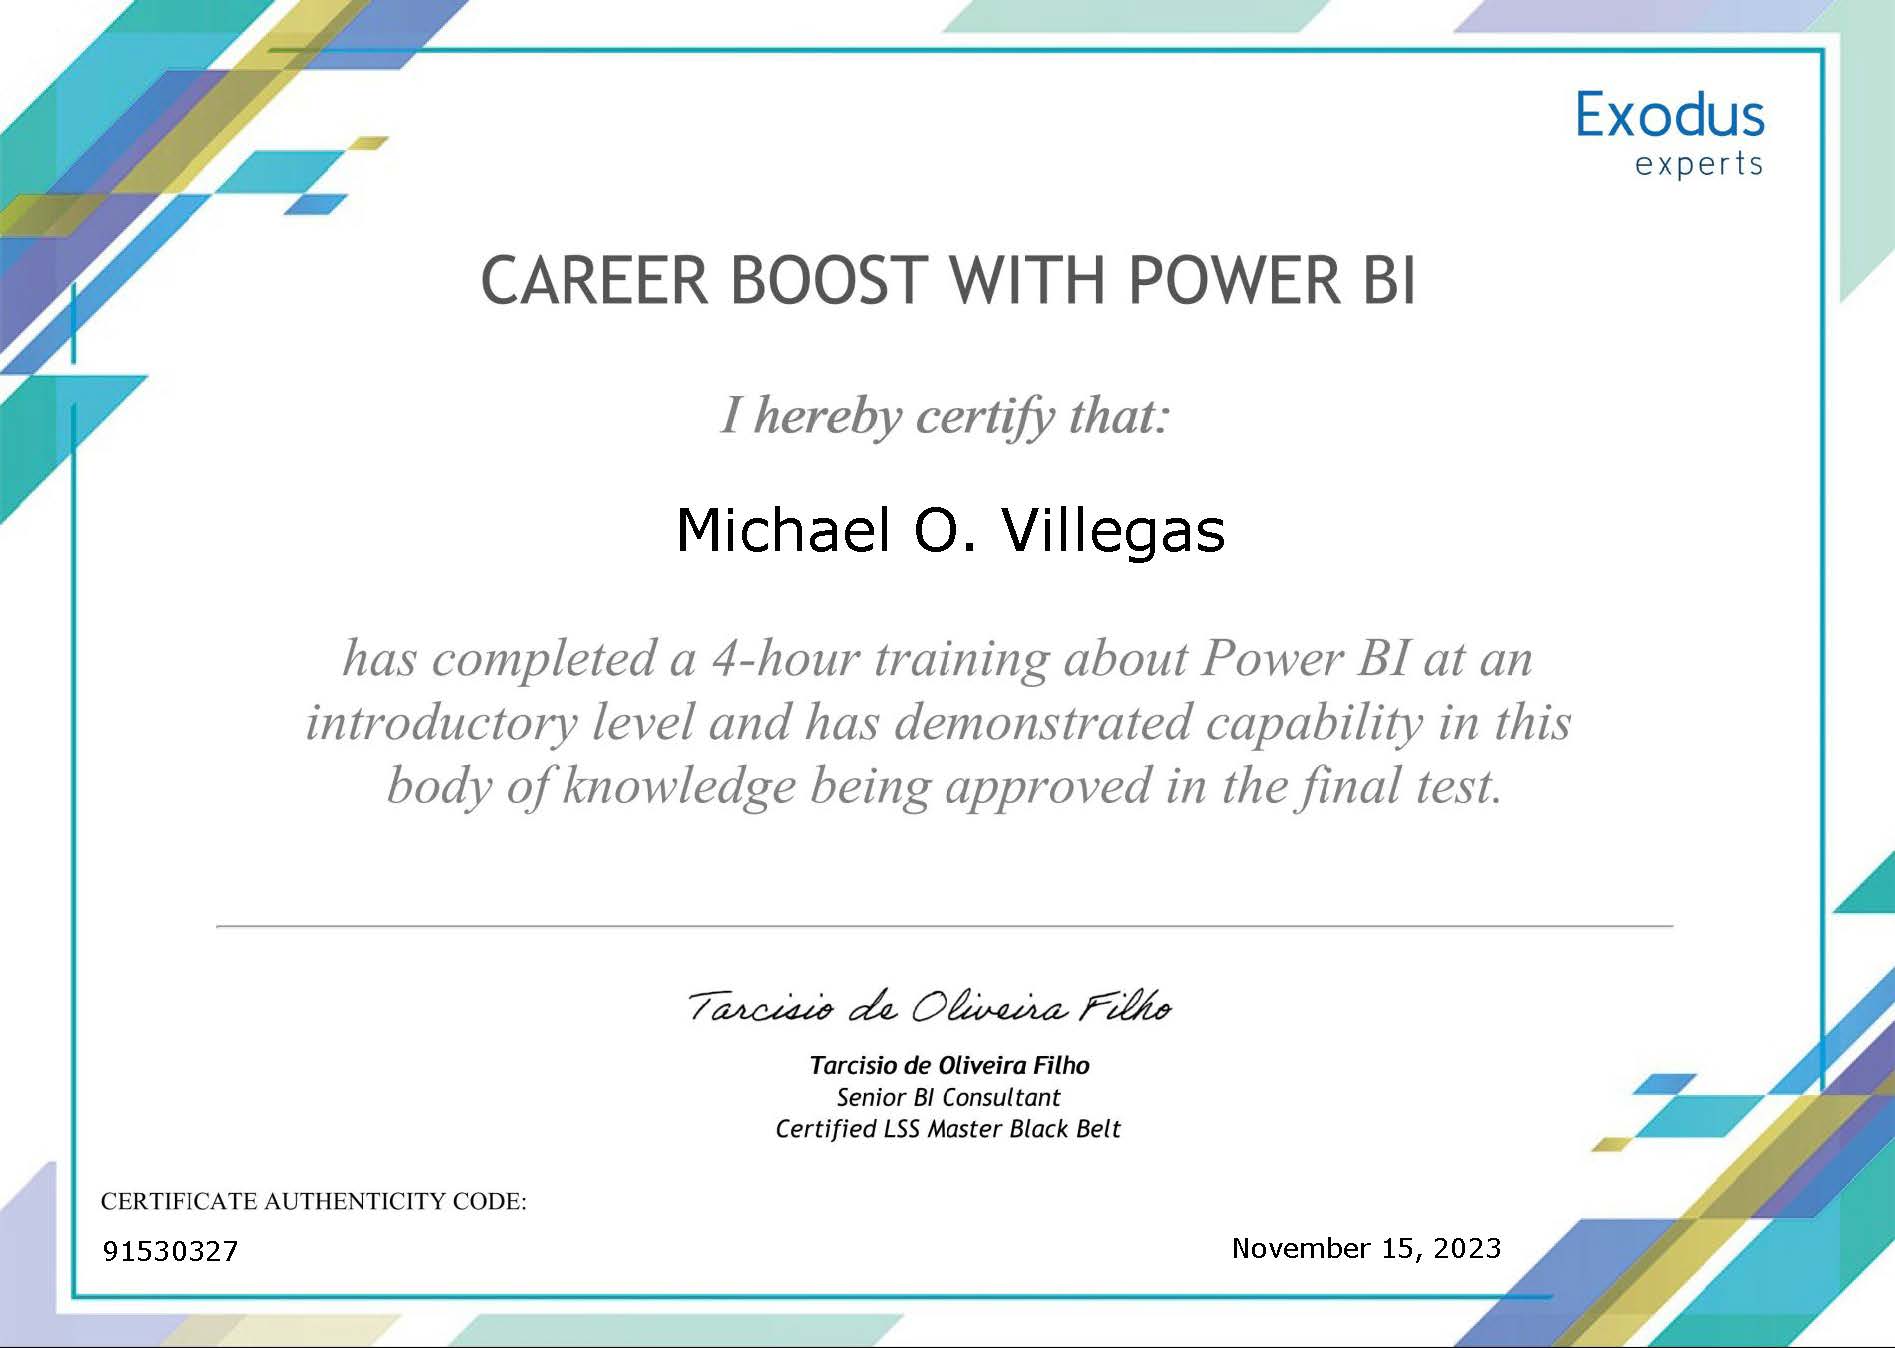 Career Boost with Power BI